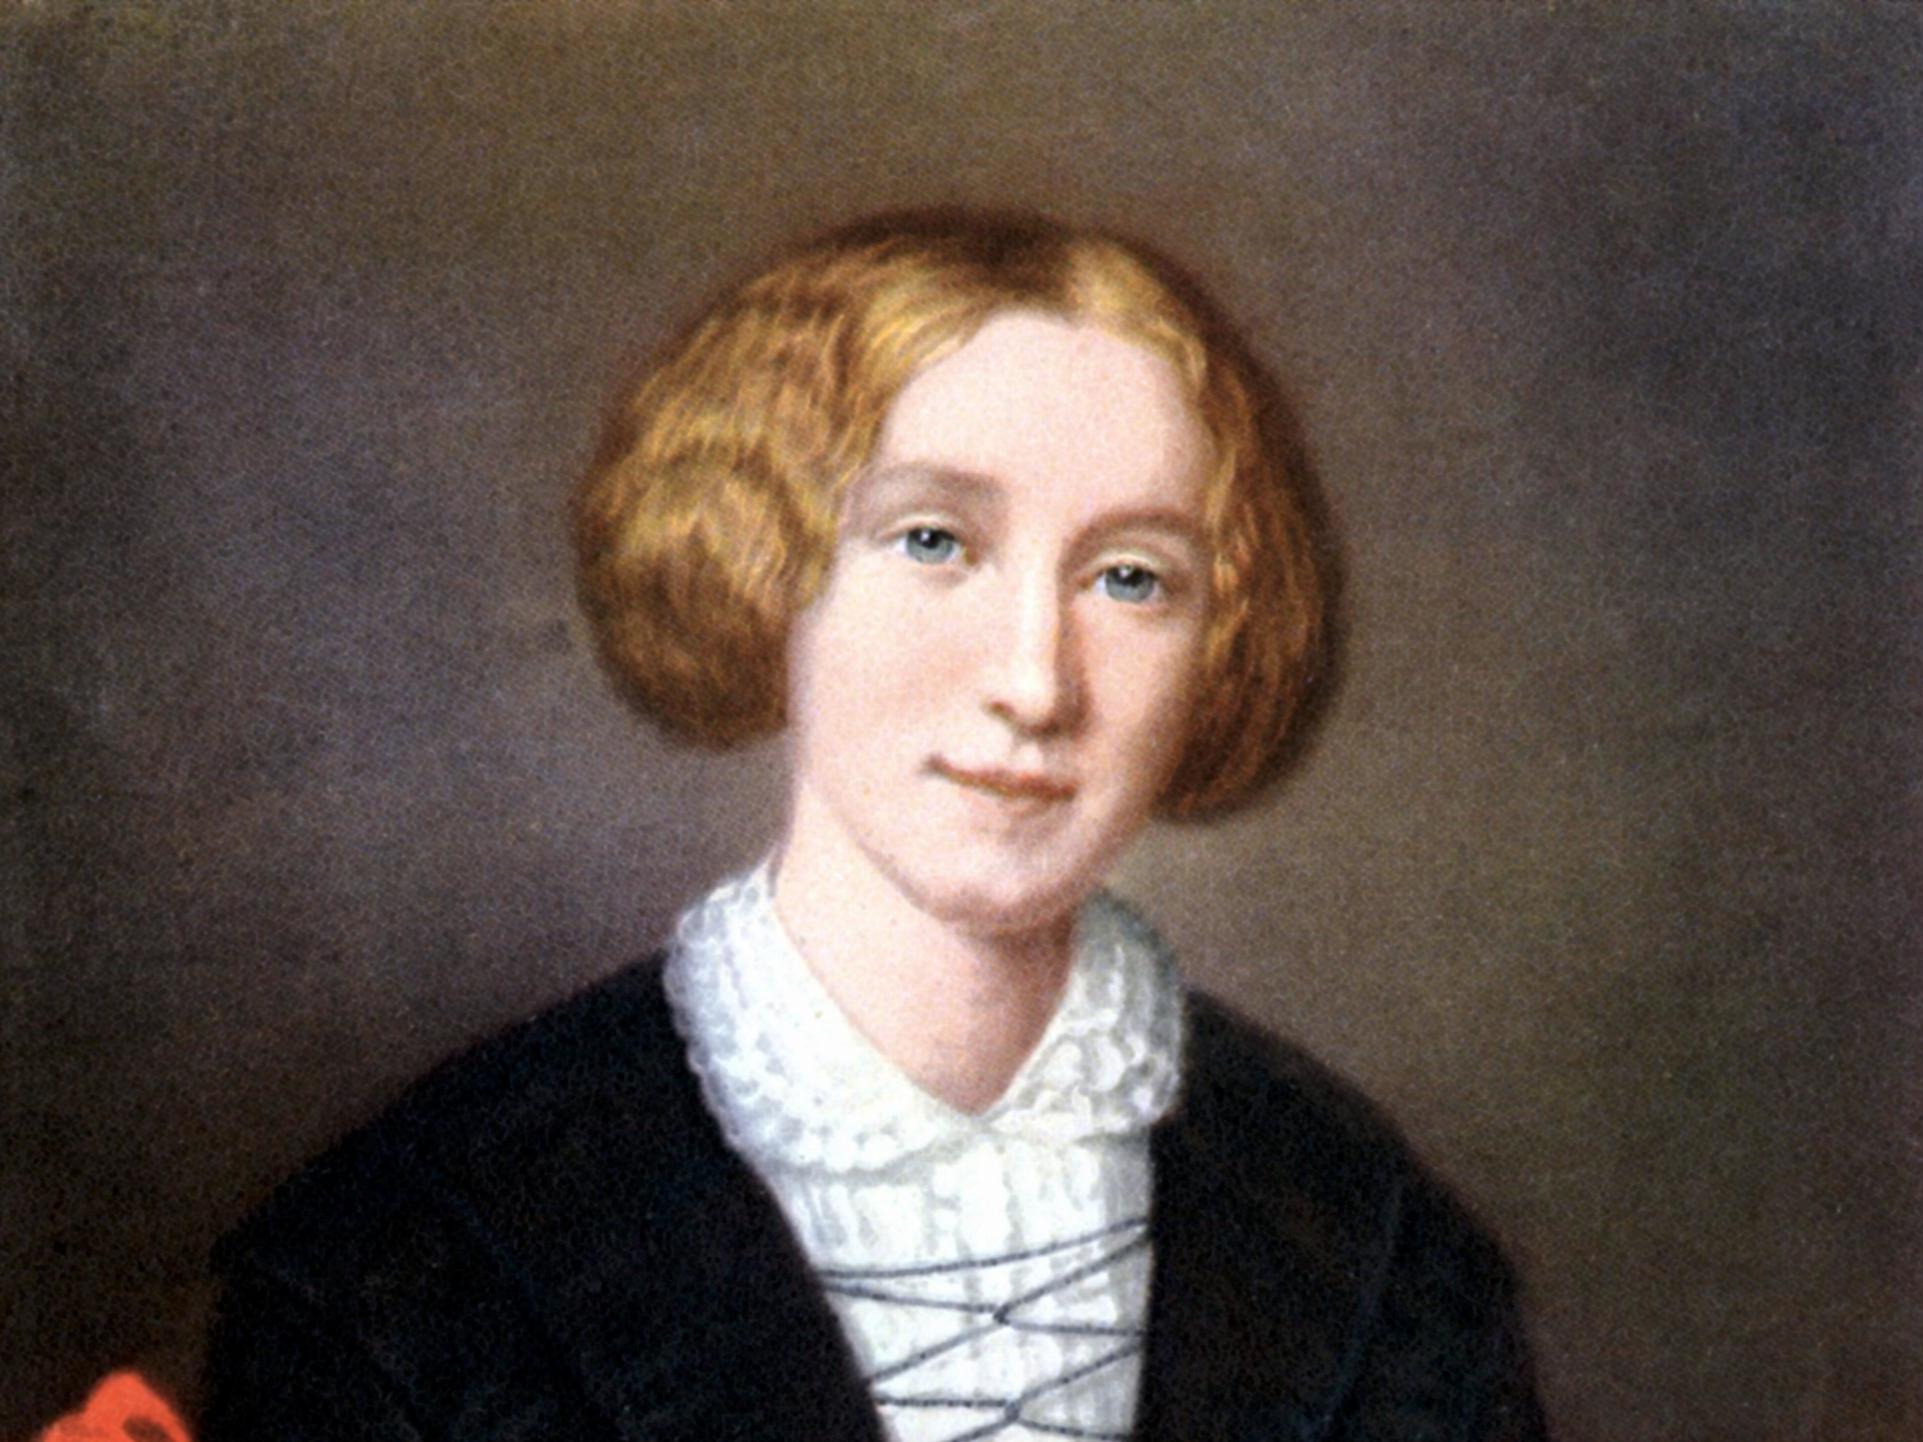 George Eliot aka Mary Ann Evans, writer of 'Middlemarch'